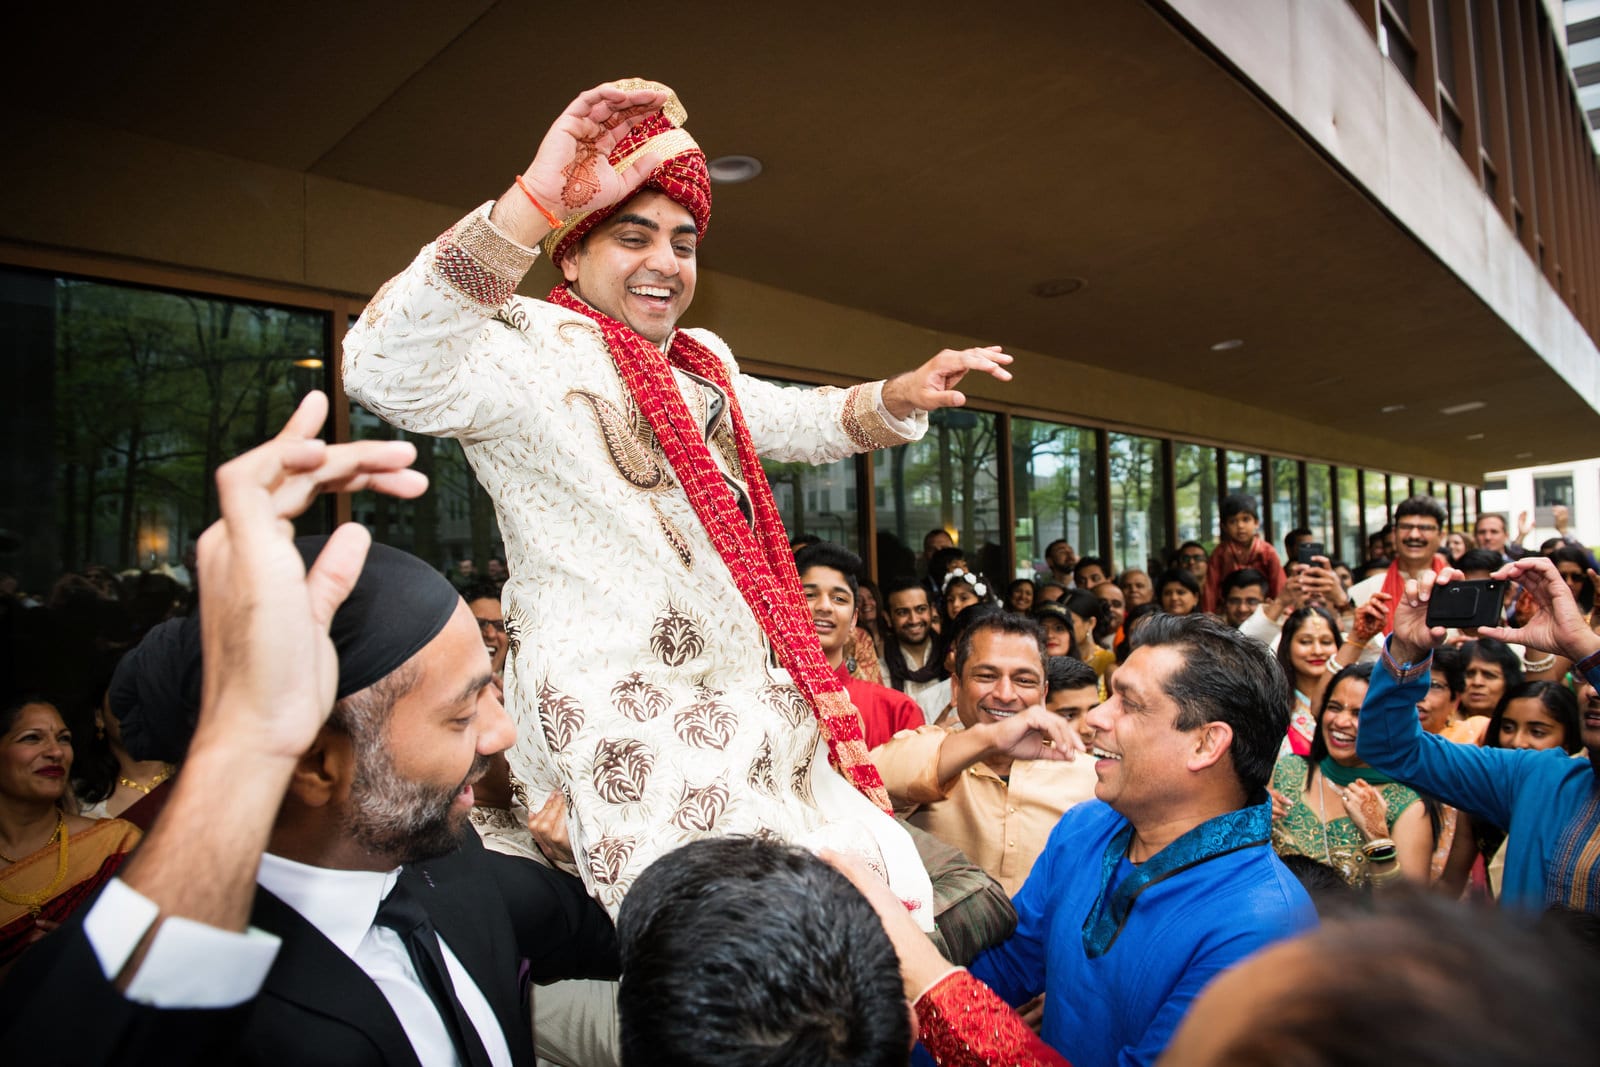 An Indian groom dressed in traditional garb is held in the air by his guests before his wedding at the Wyndham Grand hotel in Pittsburgh.